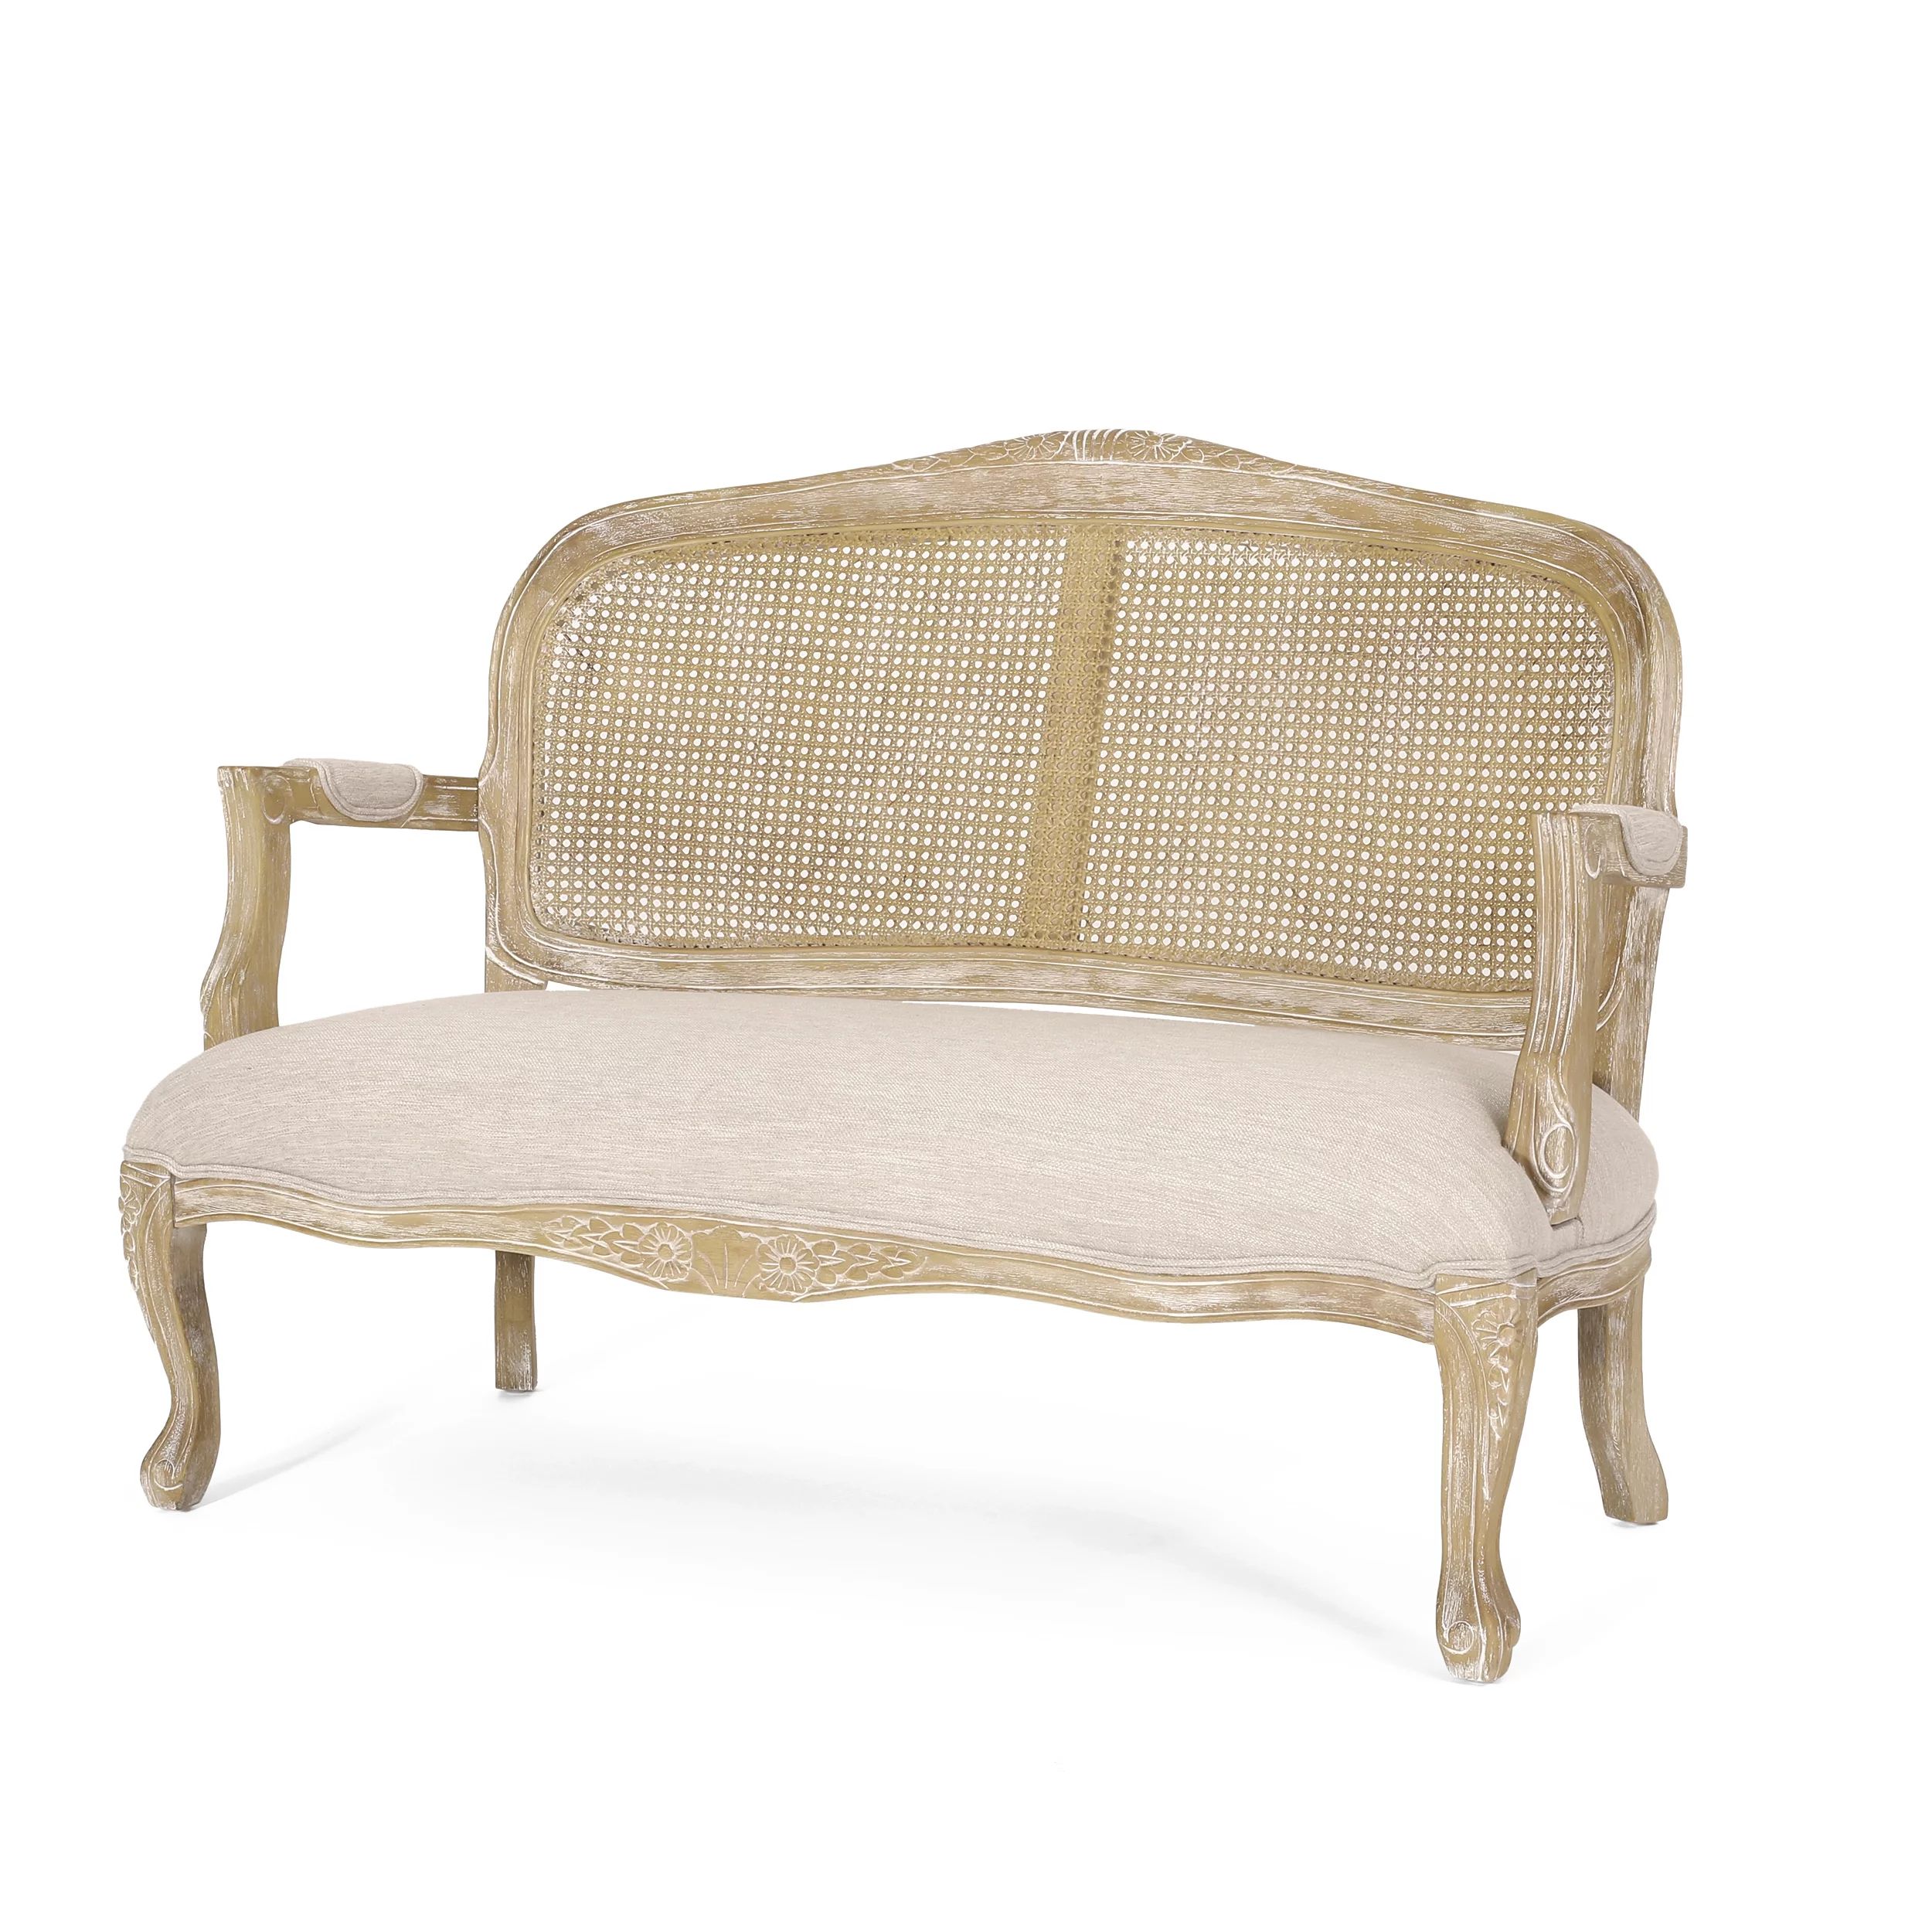 Wistar French Country Wood and Cane Loveseat, Beige and Natural | Walmart (US)